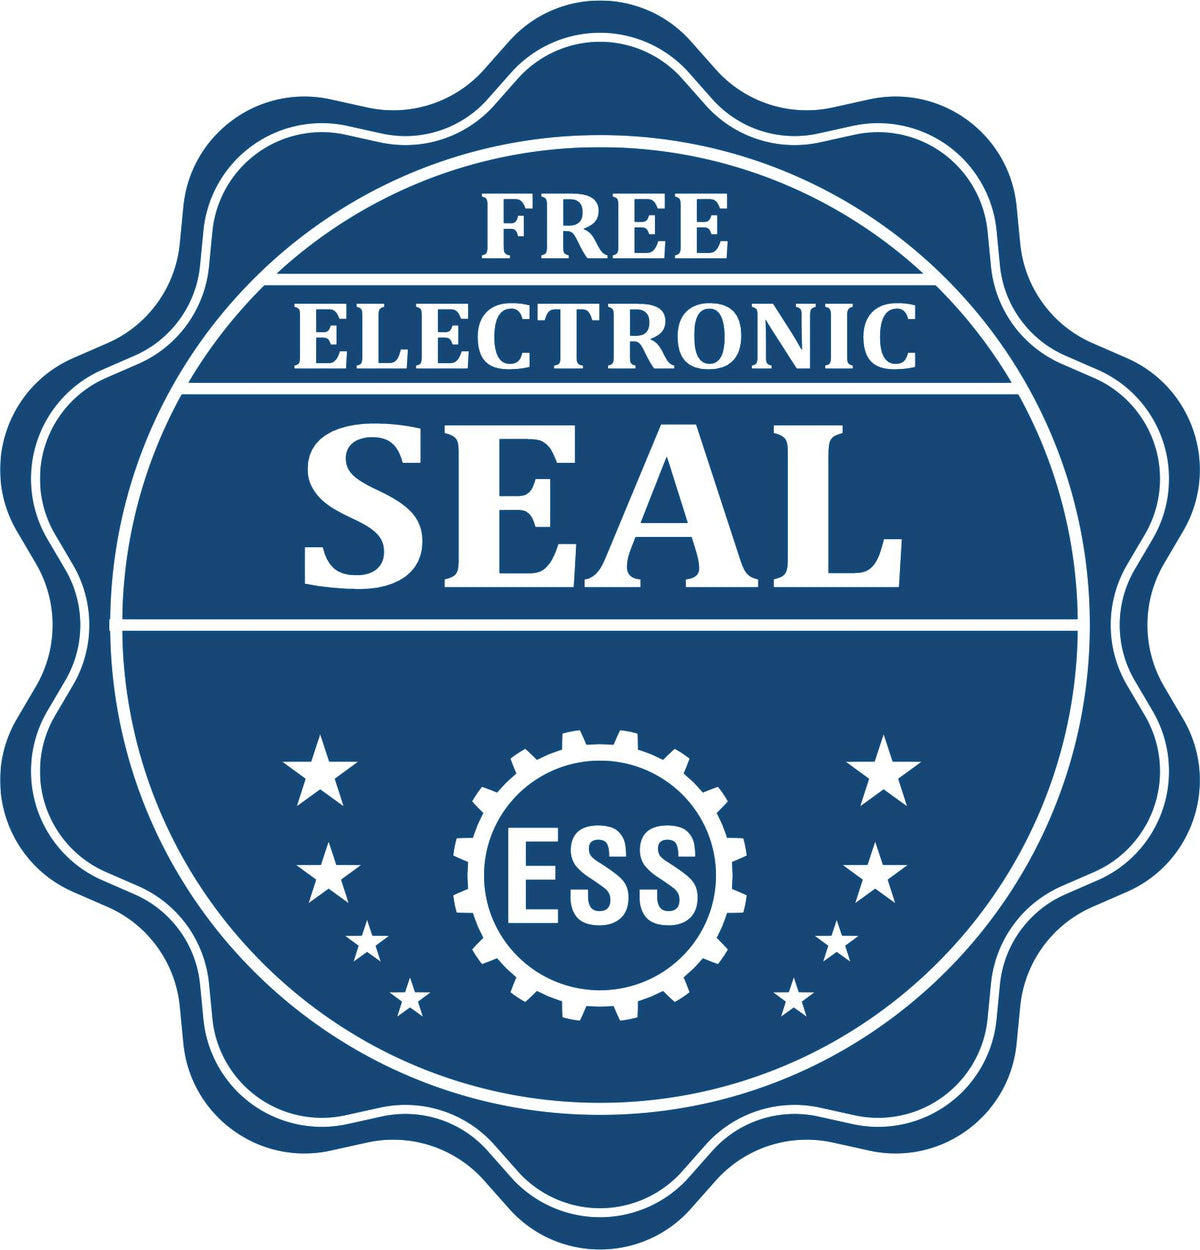 A badge showing a free electronic seal for the Handheld Indiana Professional Engineer Embosser with stars and the ESS gear on the emblem.